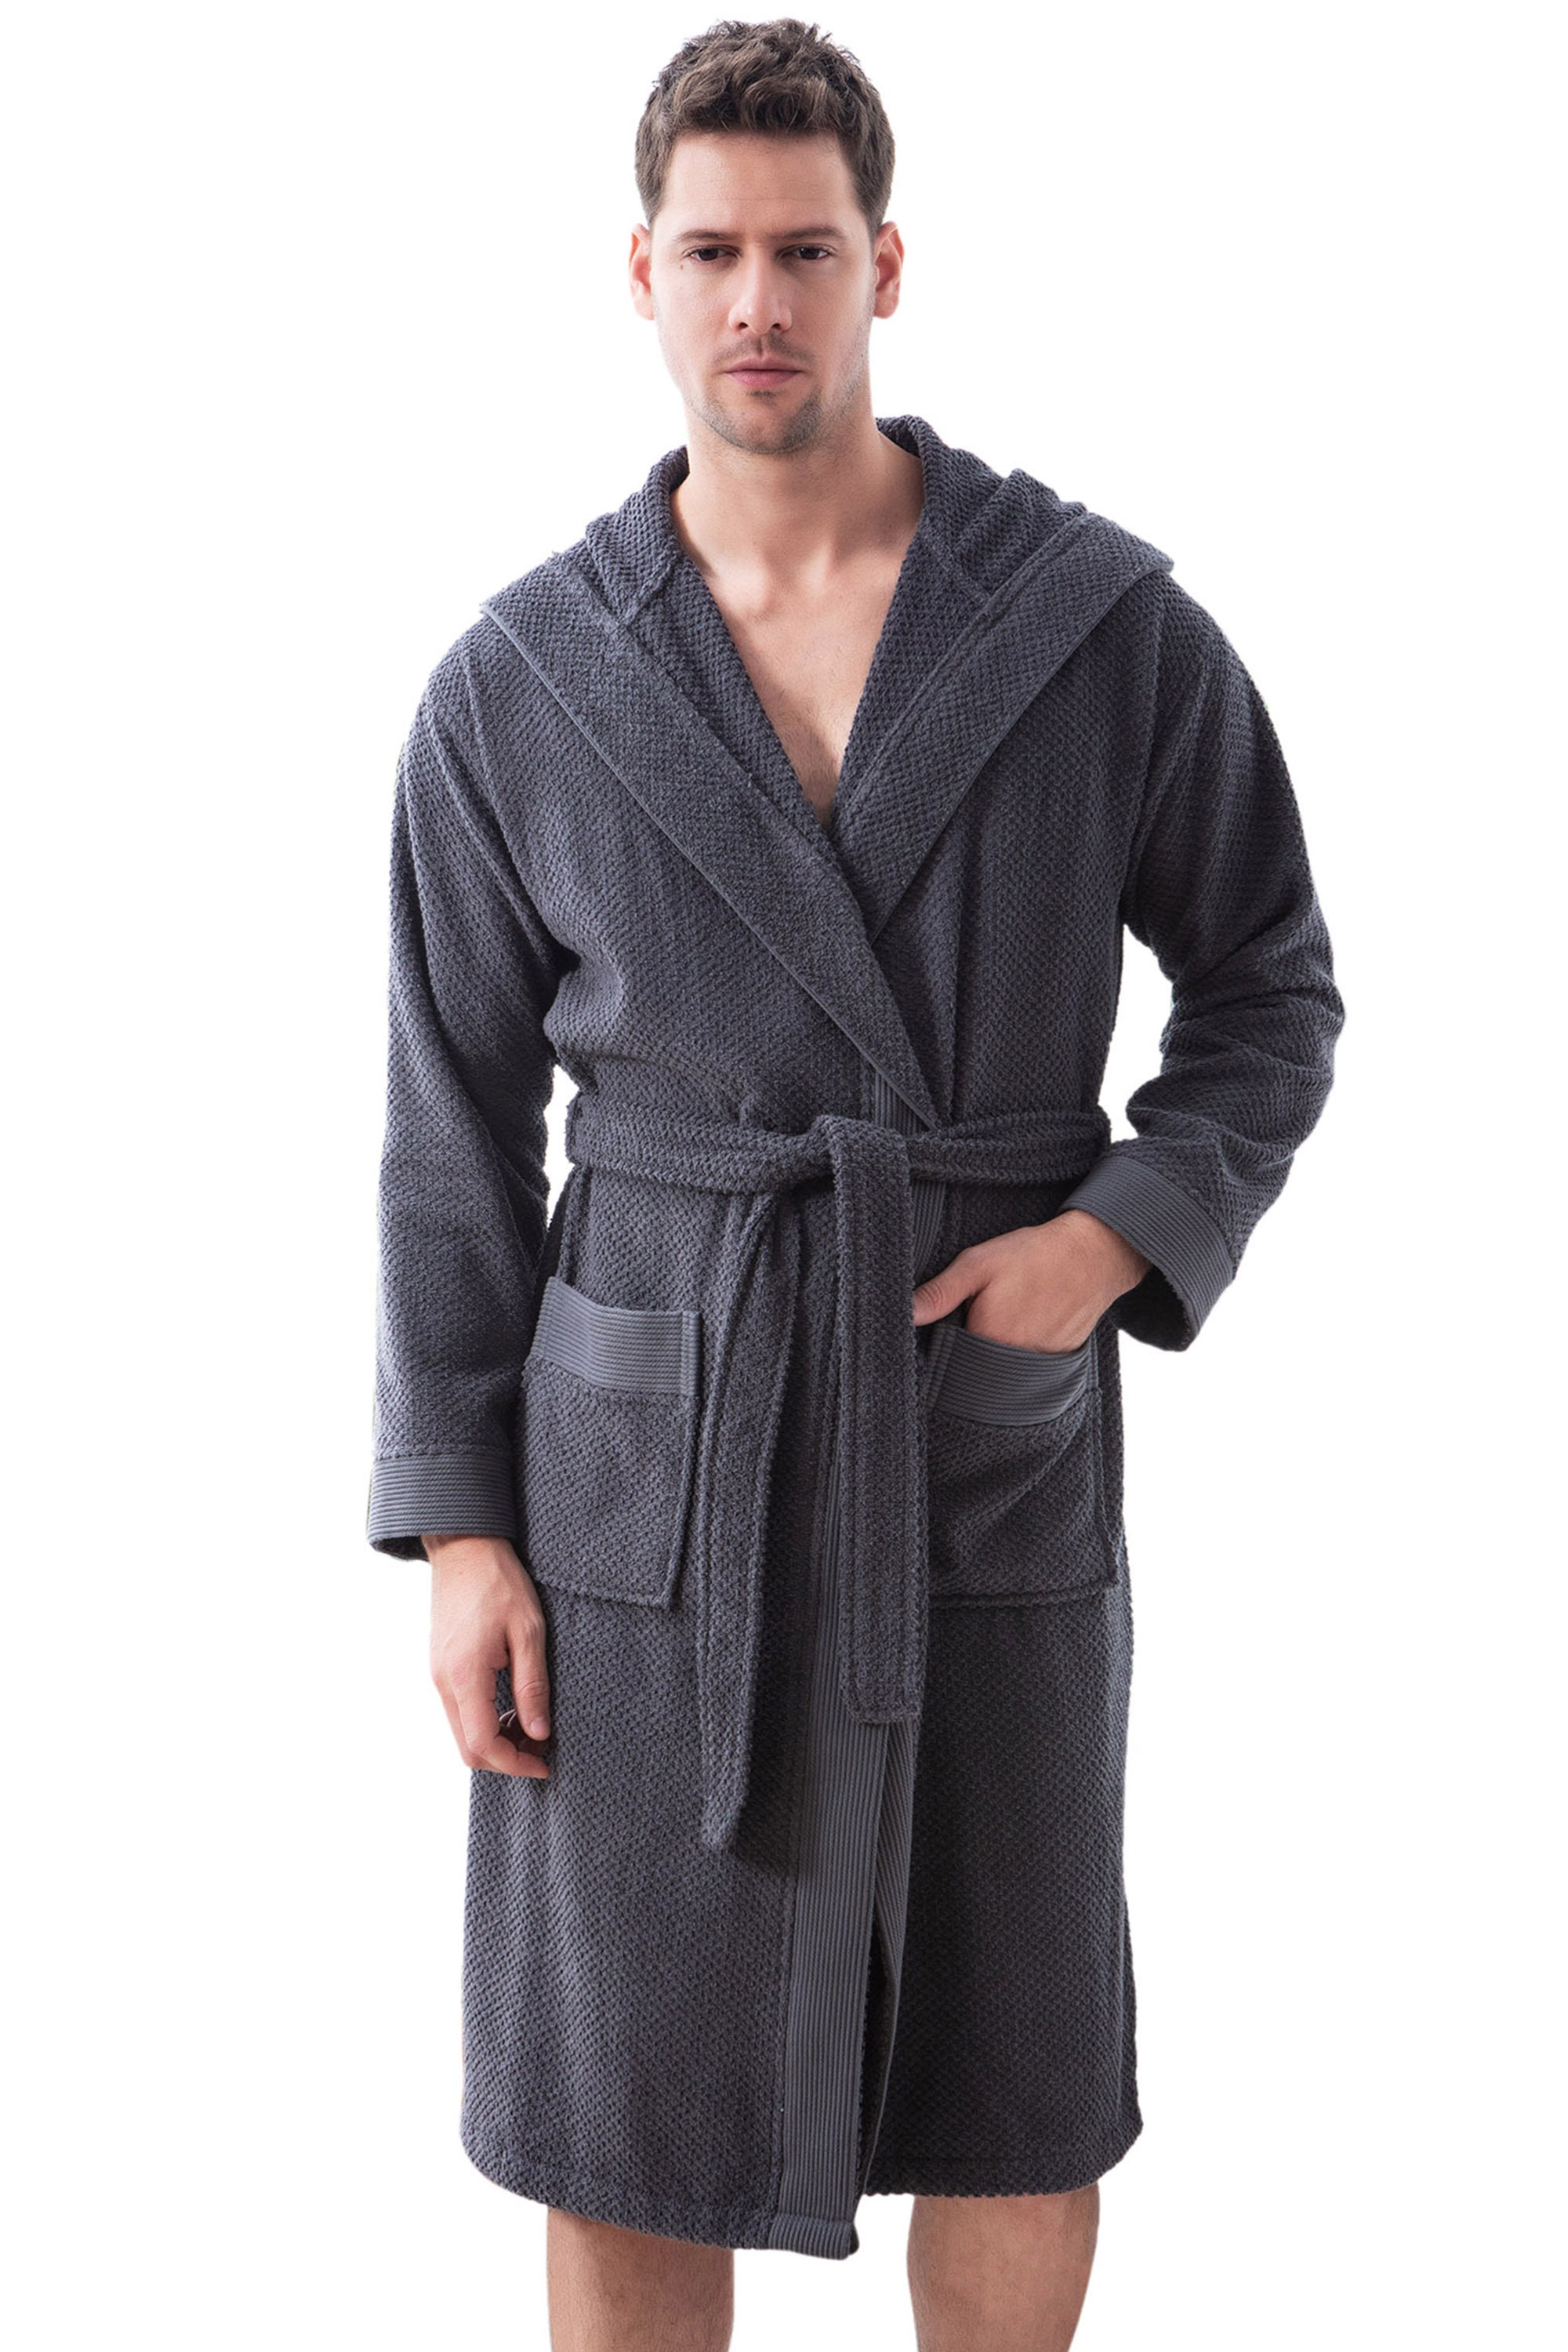 Terry Men's Premium Hooded Bathrobe Made With Turkish | Etsy